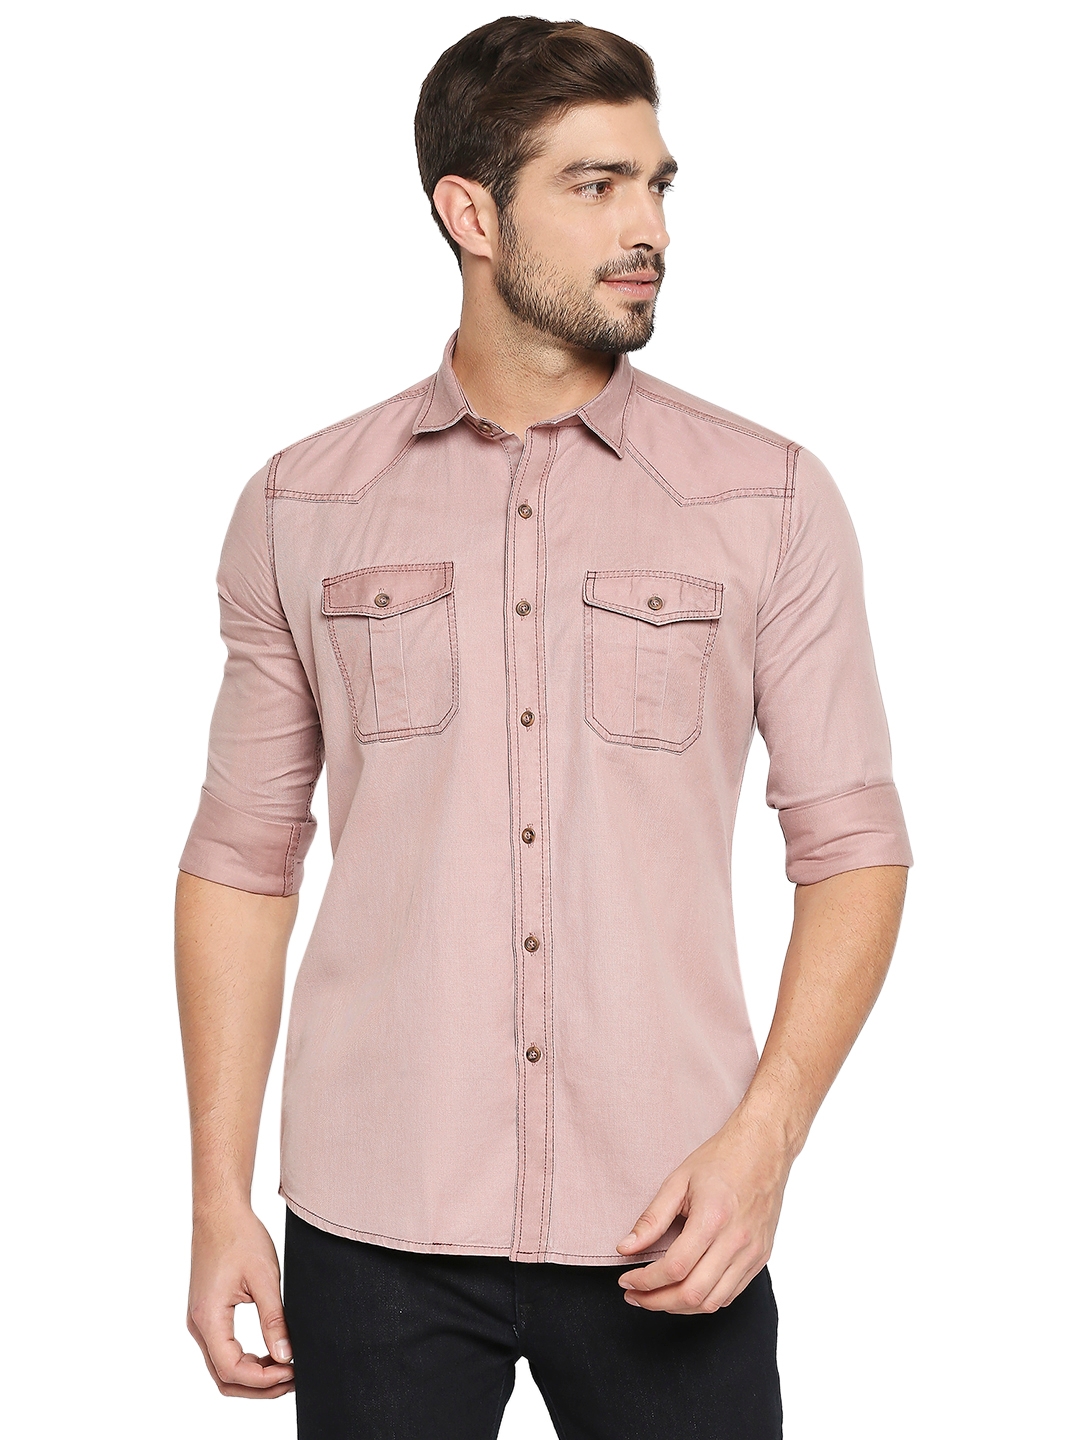 EVOQ | EVOQ Full Sleeves Solid Cotton Pink Casual Shirt